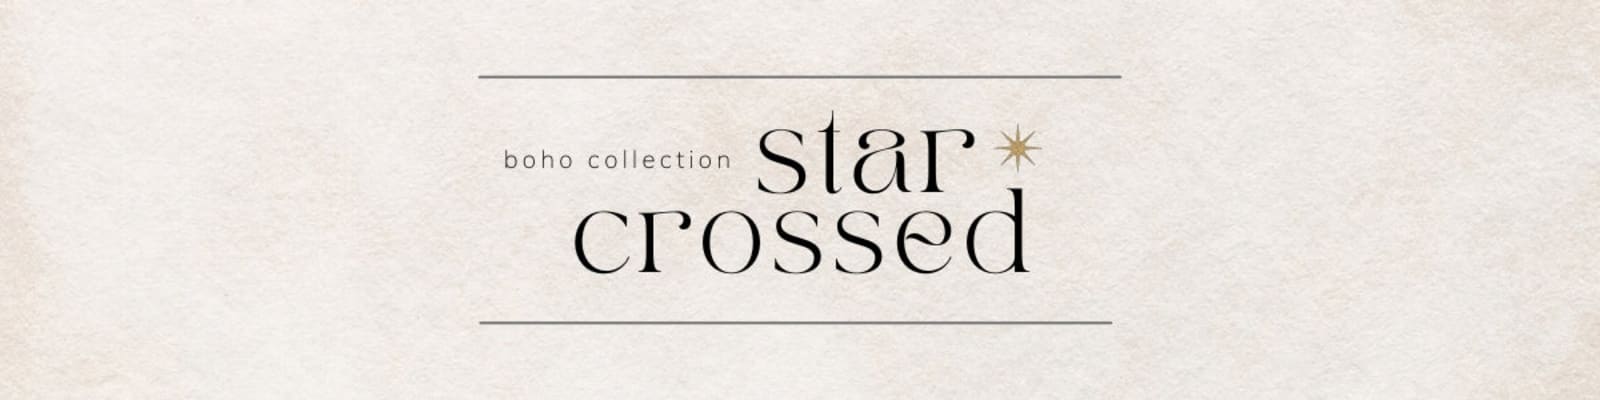 star crossed collection